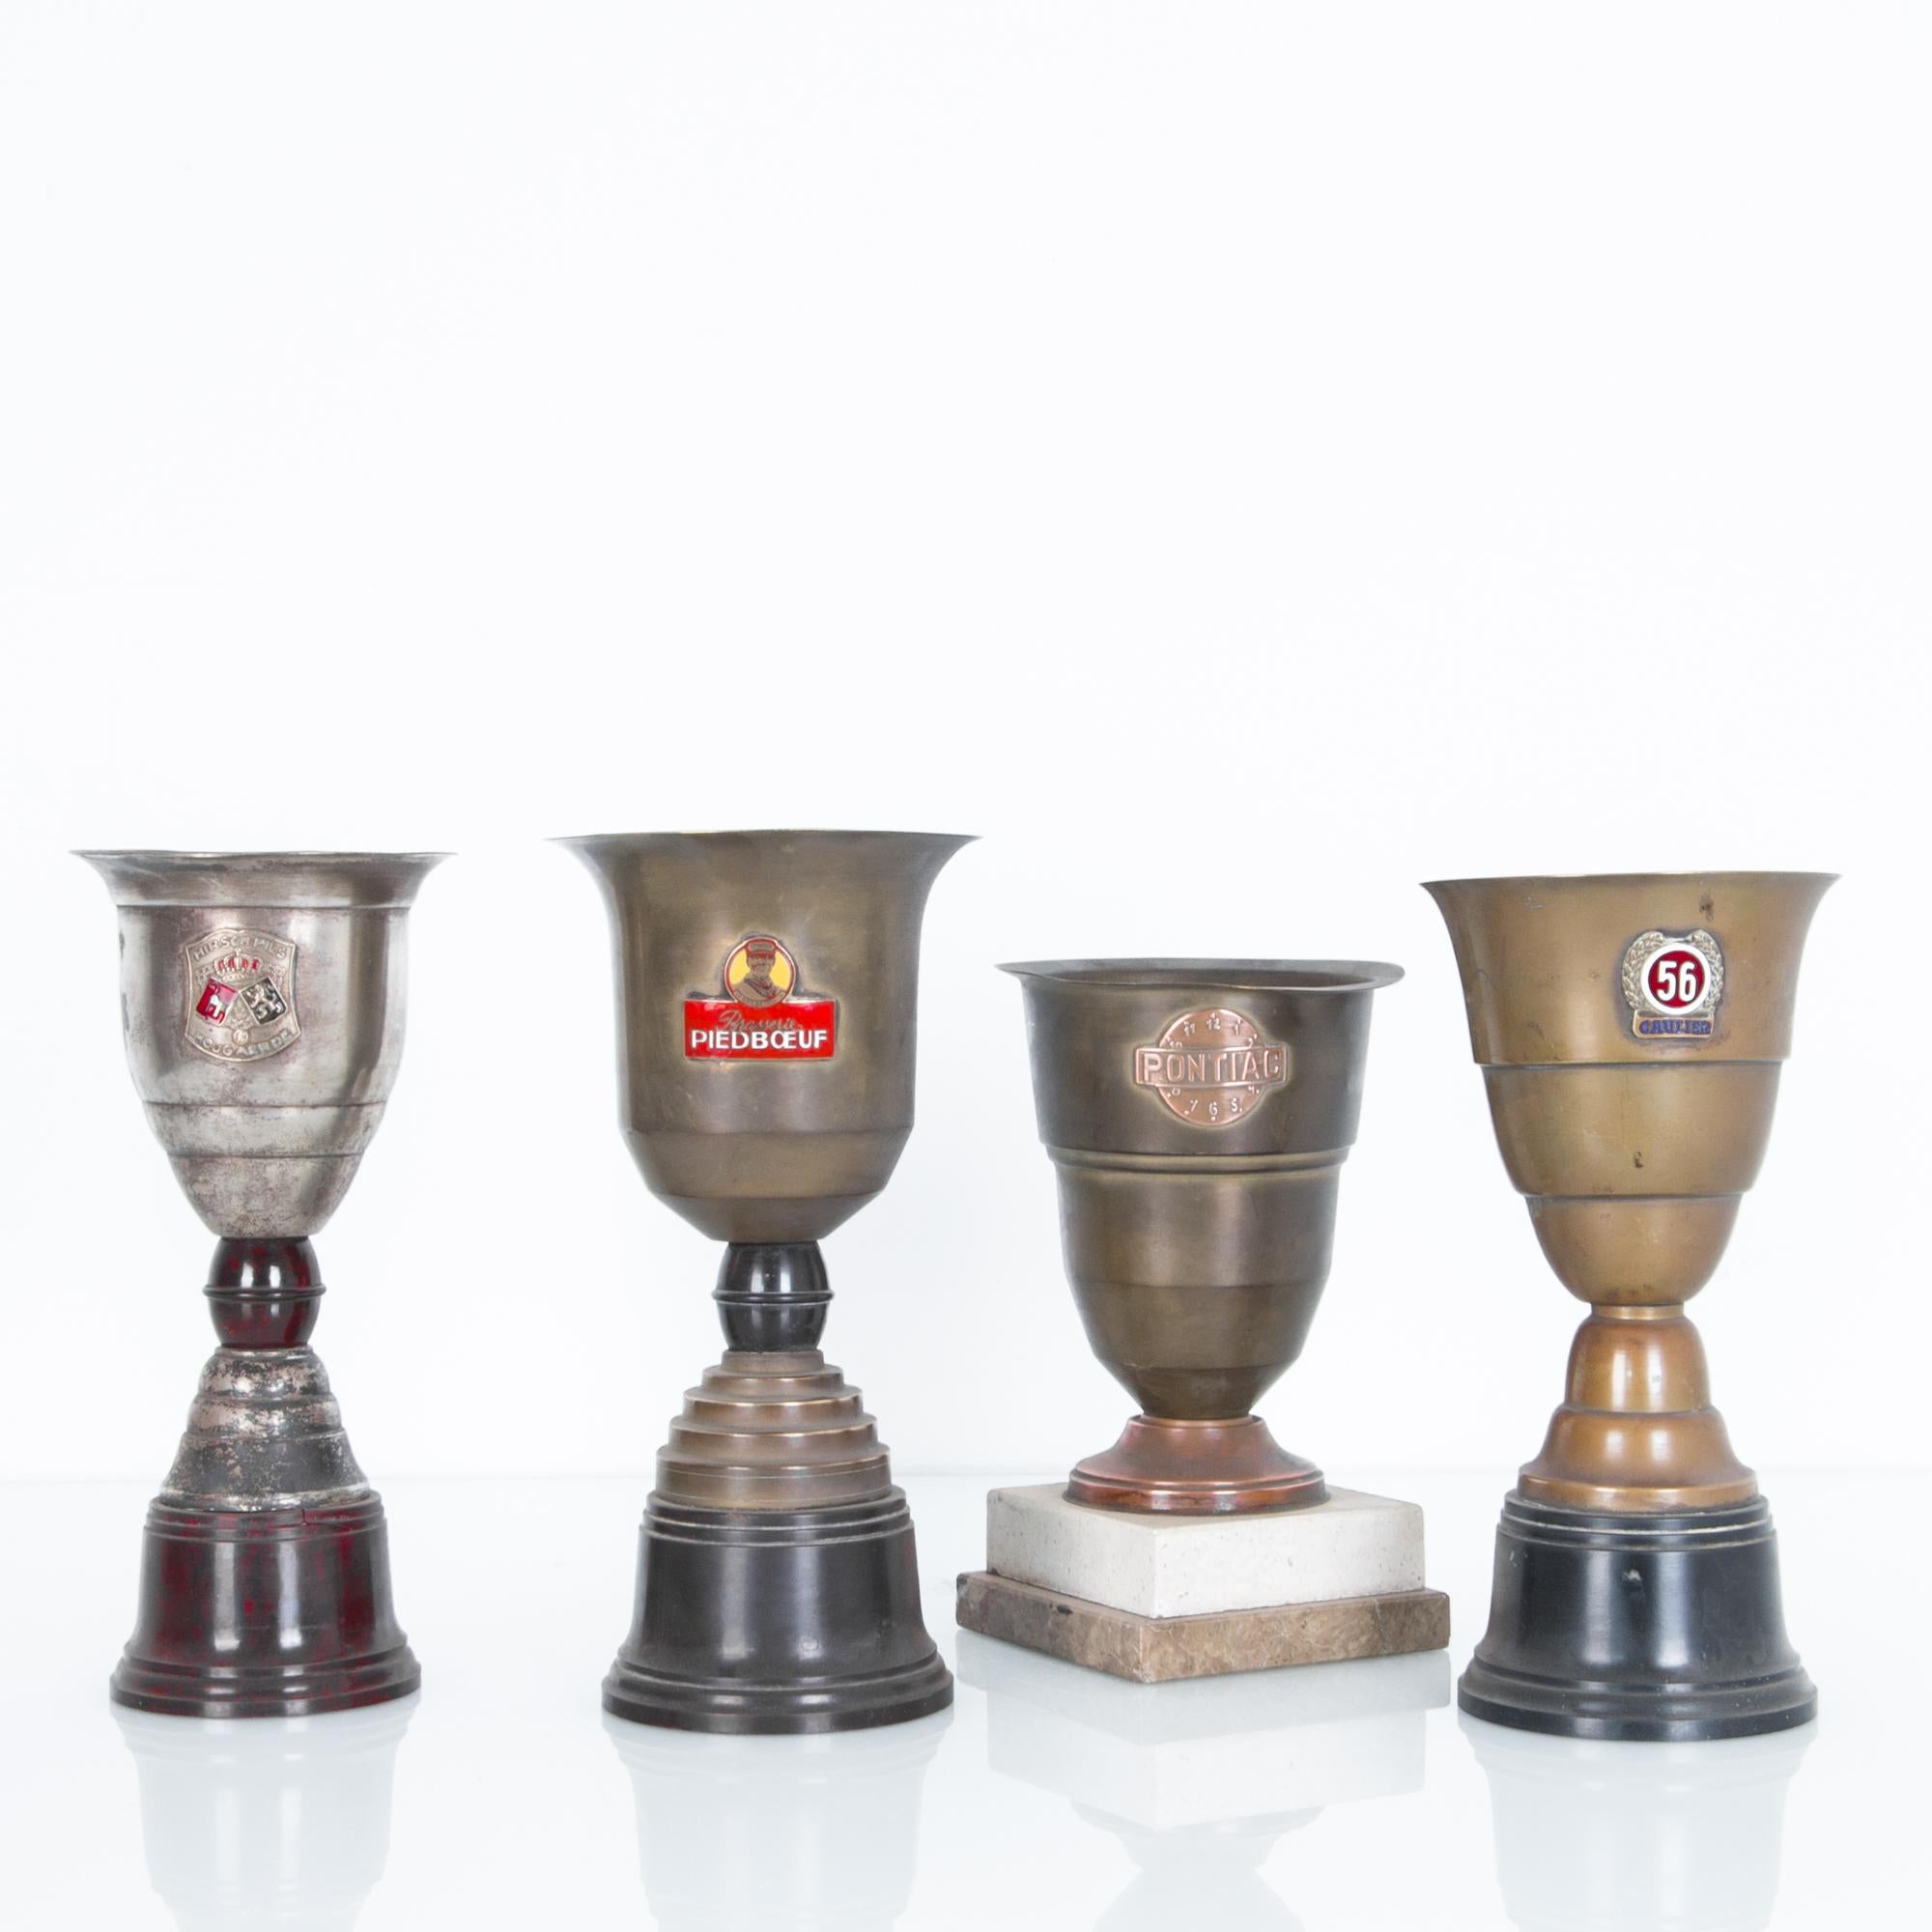 Brass, silver, polished wood and marble. Elegance from an era passed by, some evidence of wear, tarnished silver plating, for a great vintage look. Representing the winners of various races from the 1950s Belgium, emblazoned with logos, sponsors and